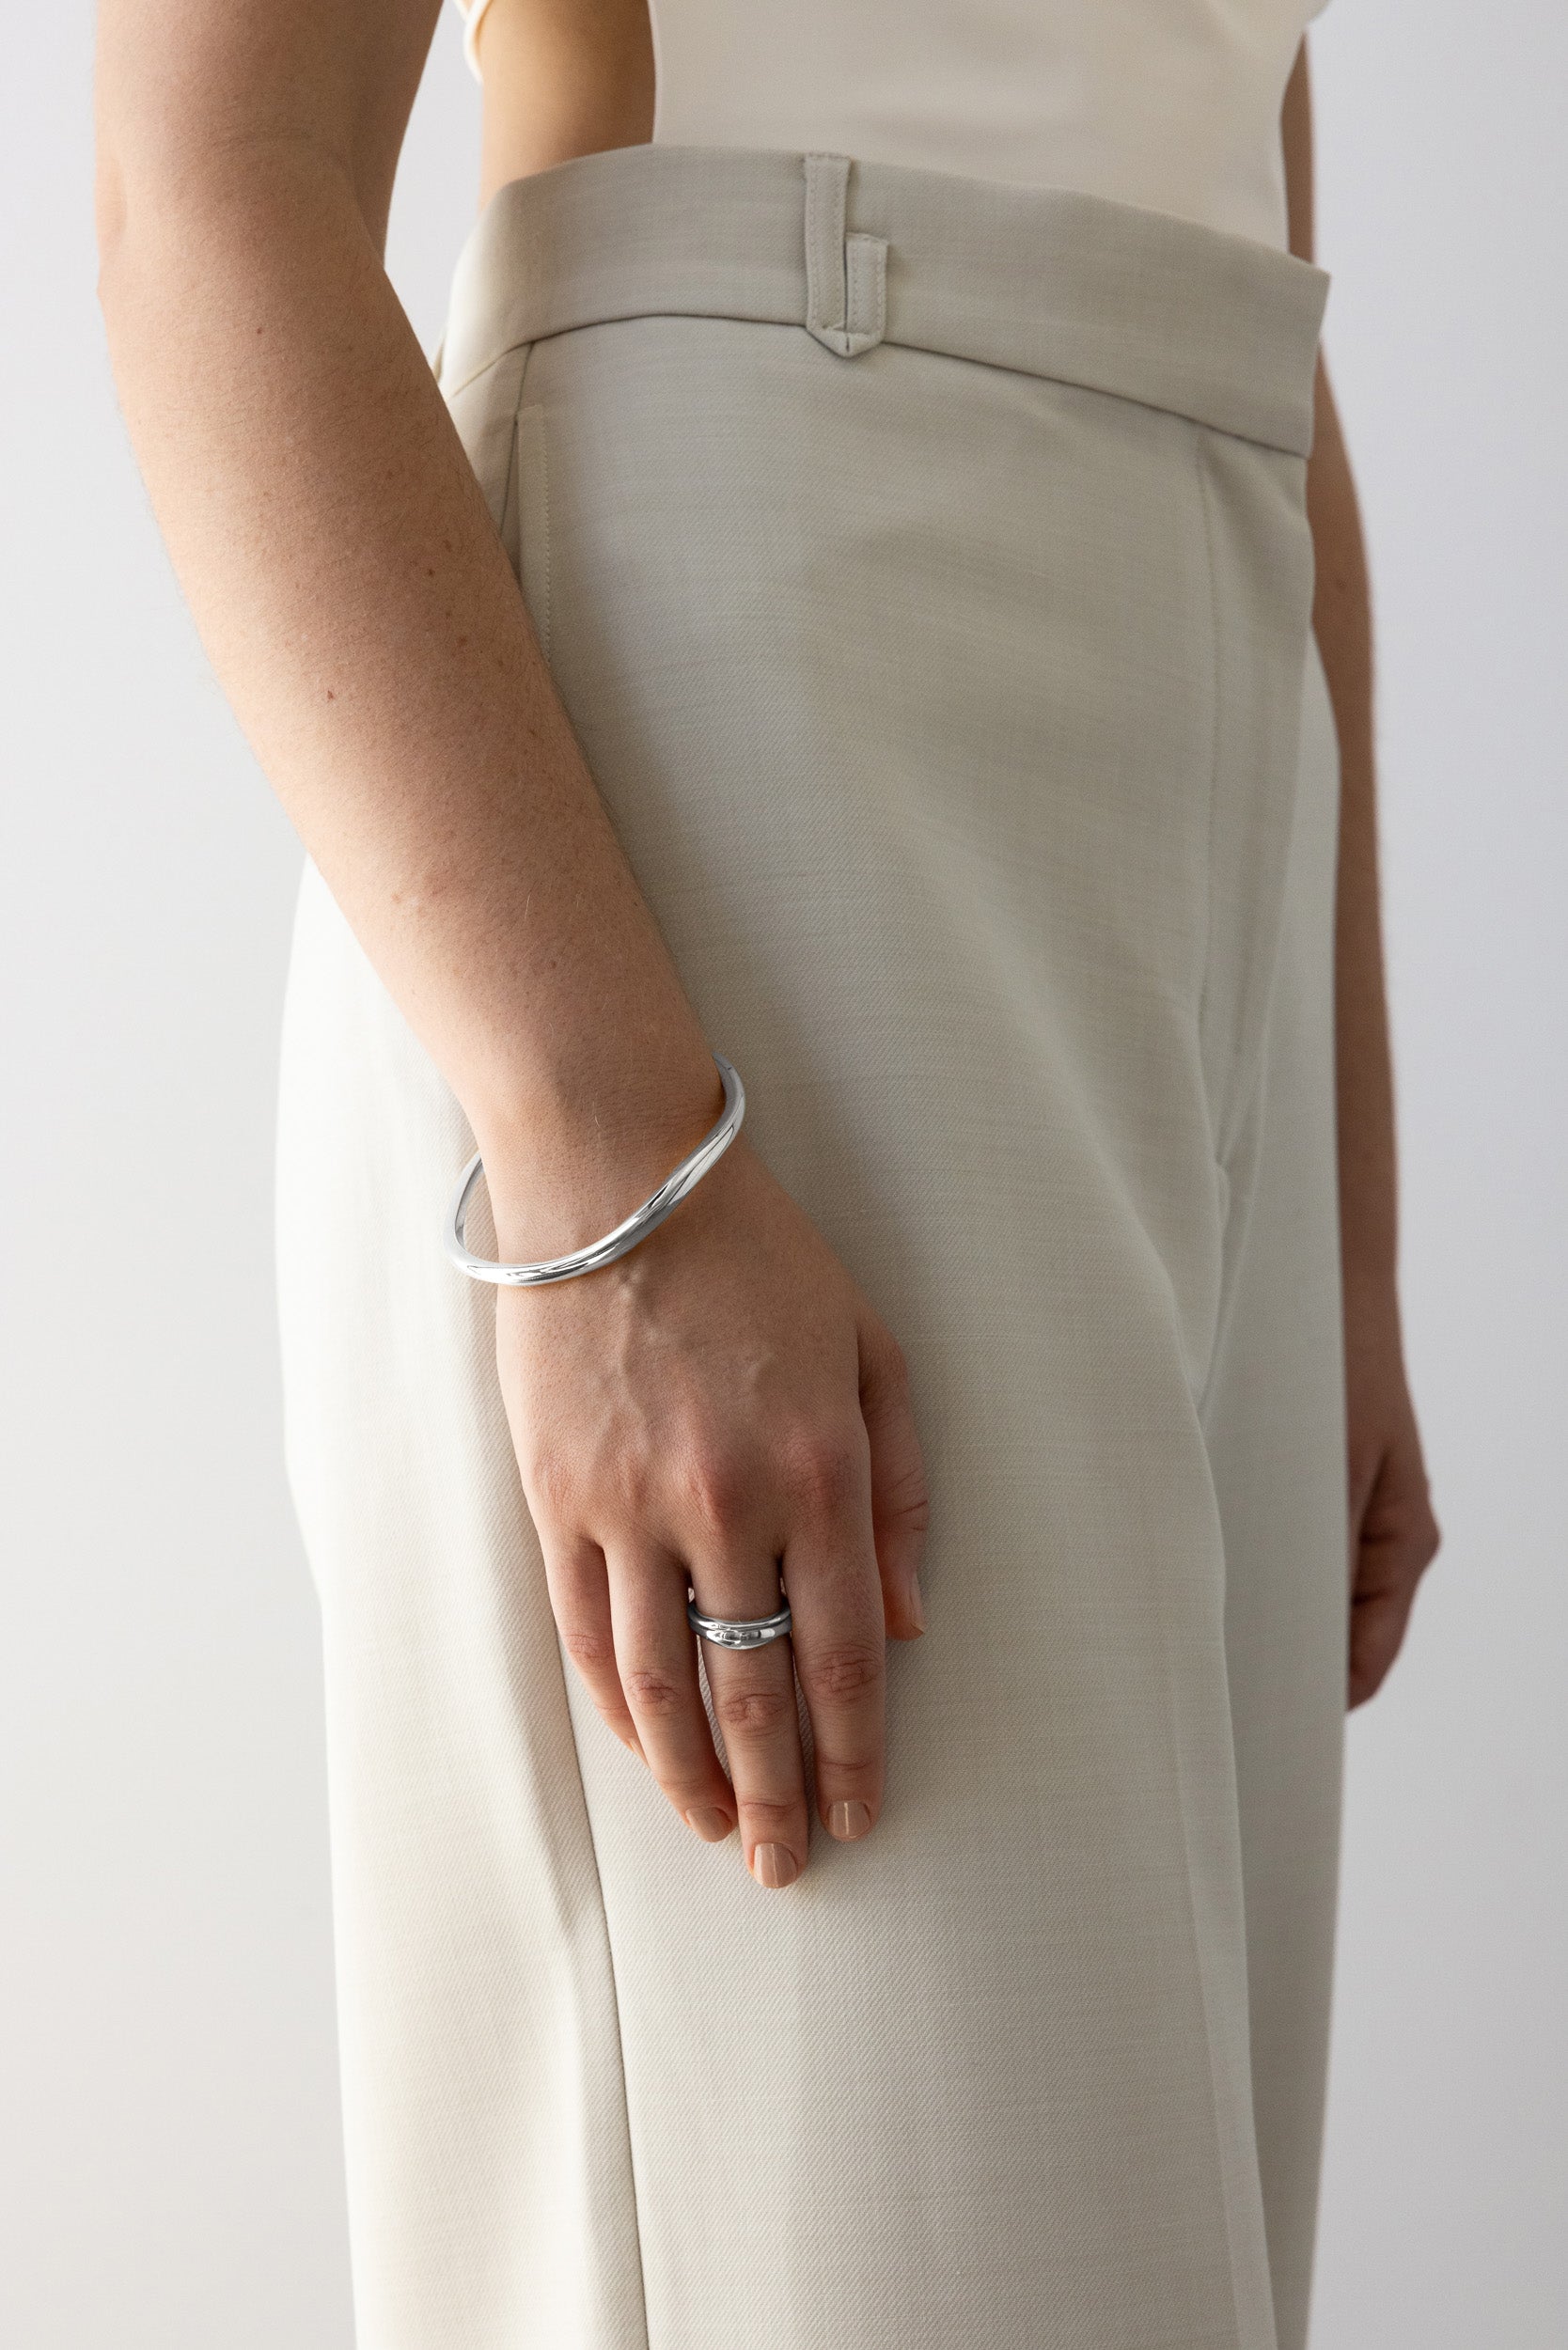 Flash Jewellery Fundamental Bangle in Sterling Silver on model hand by side